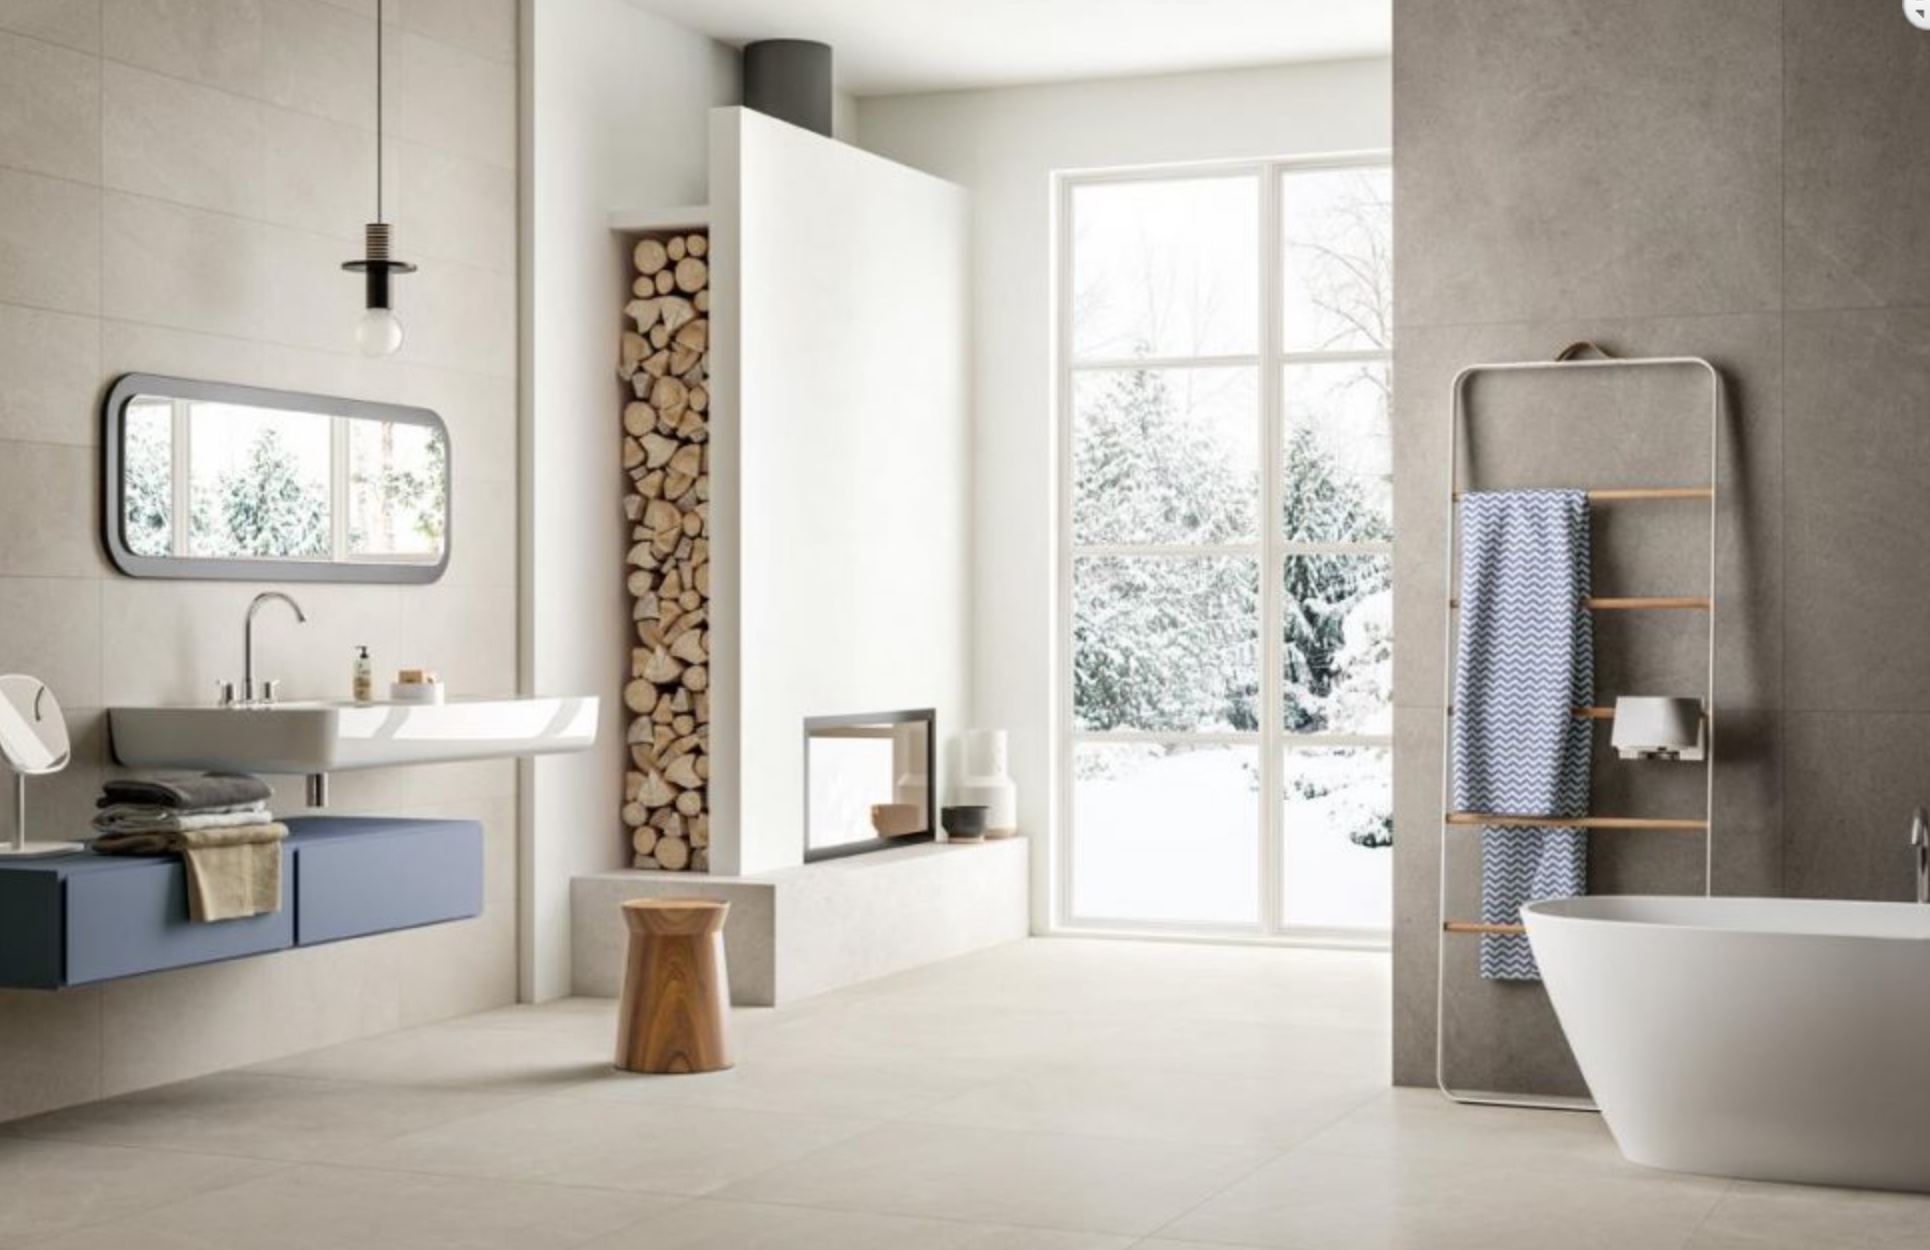 Blustyle's Yosemite Collection of porcelain tiles in bathroom